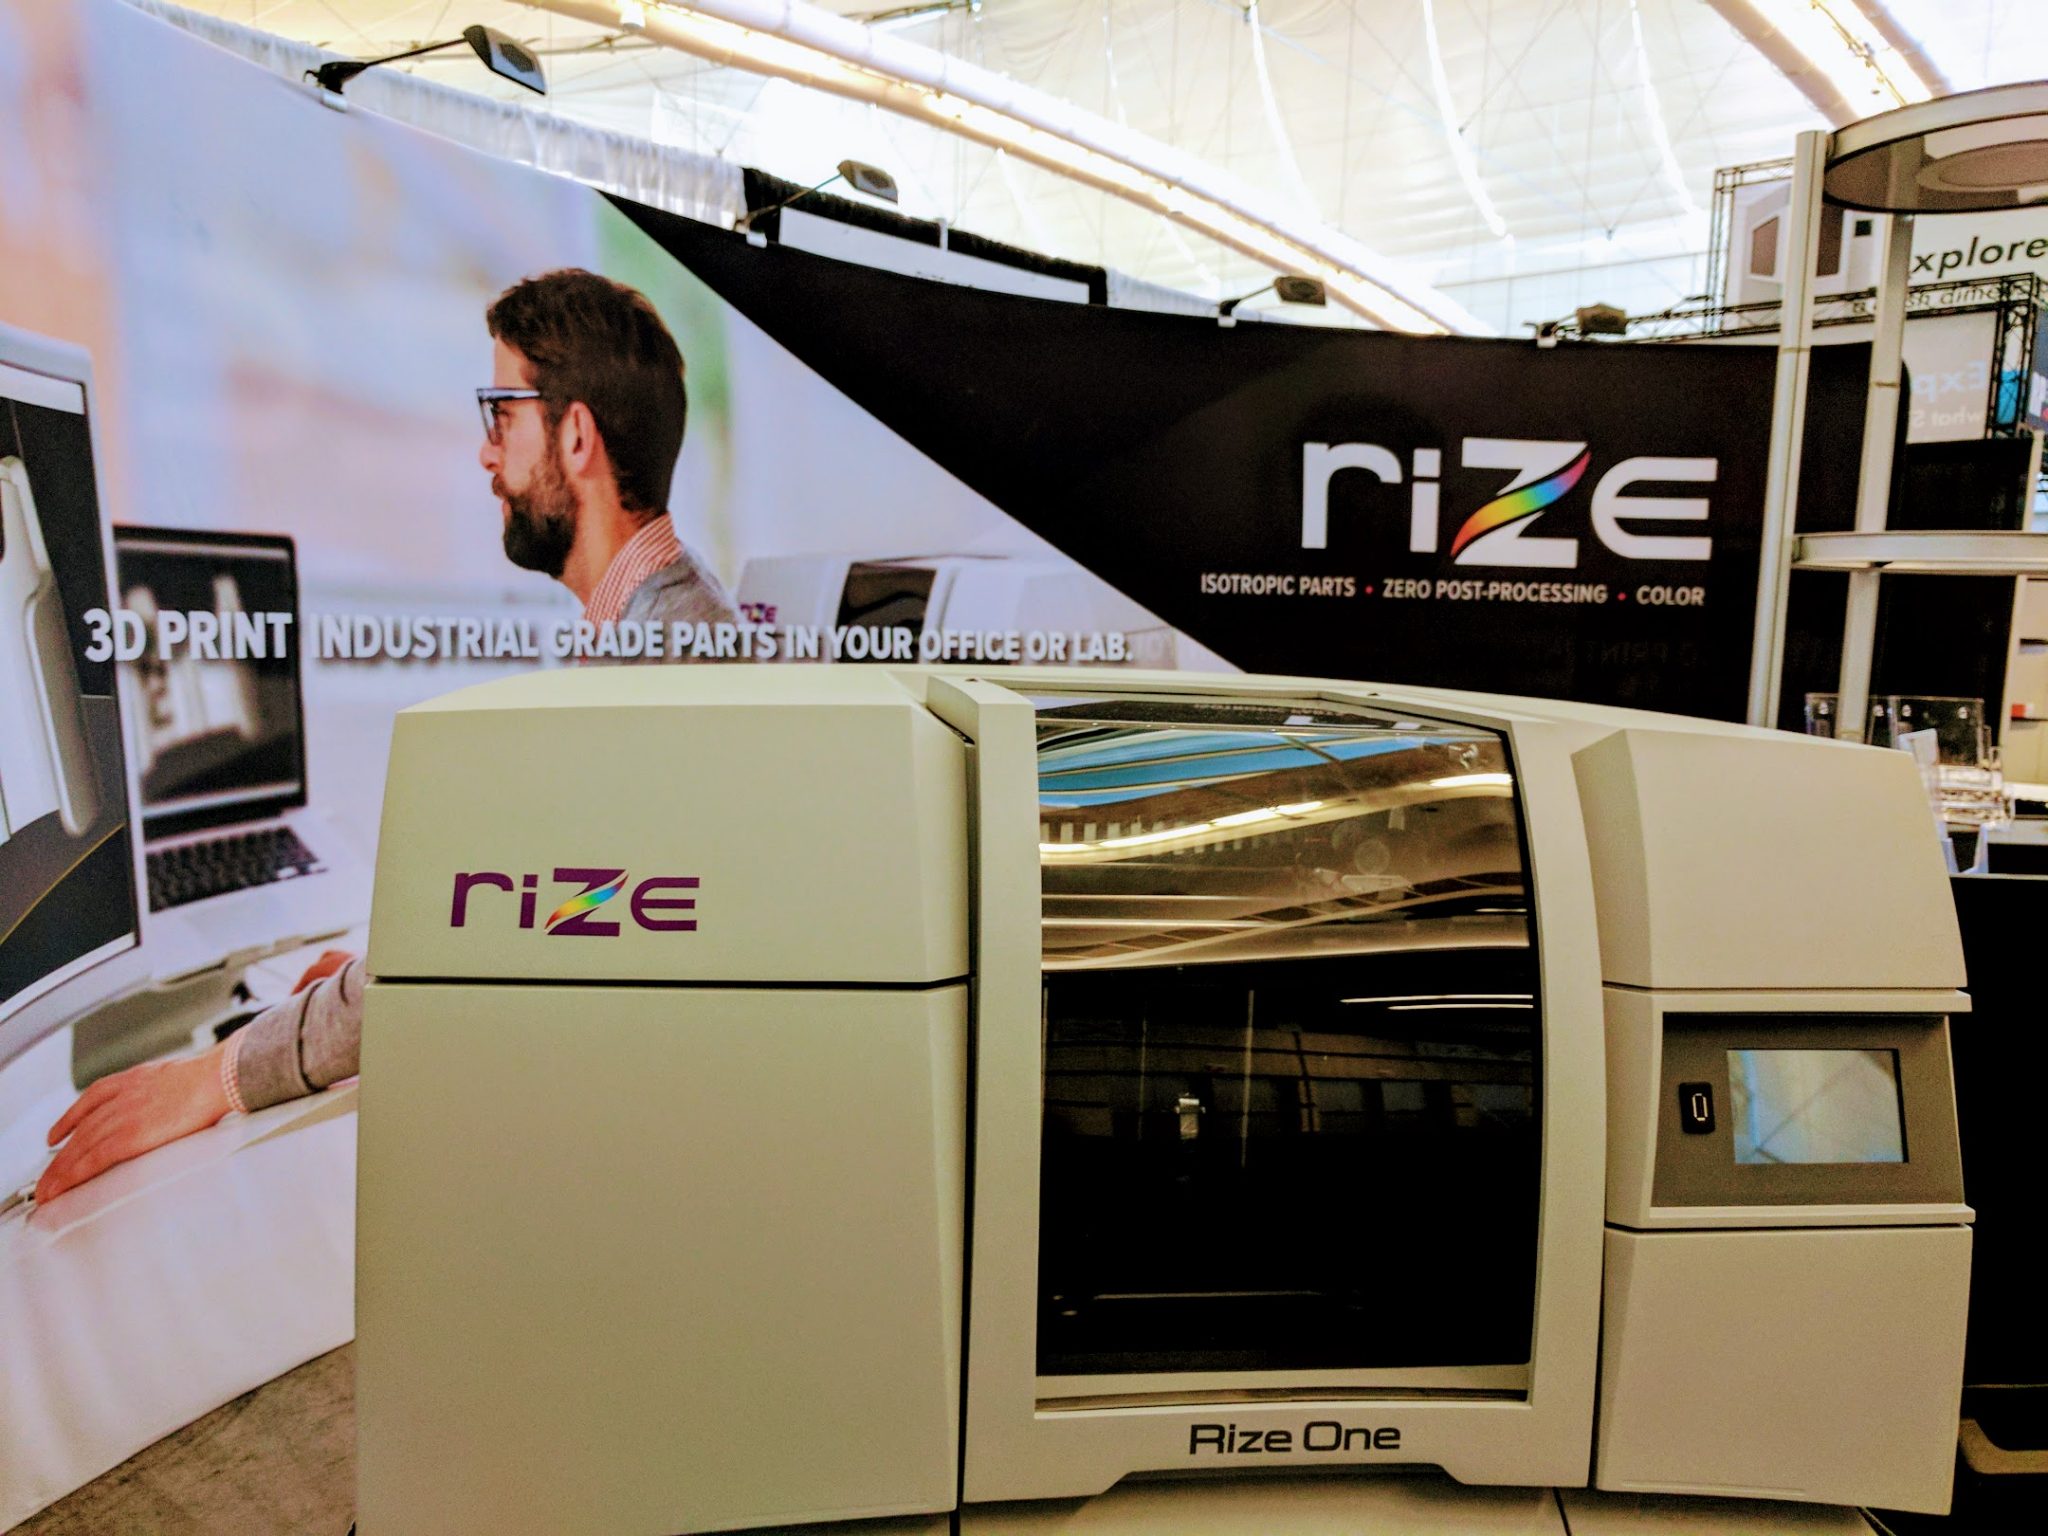 The Rize One 3D printer. Photo by Michael Petch.